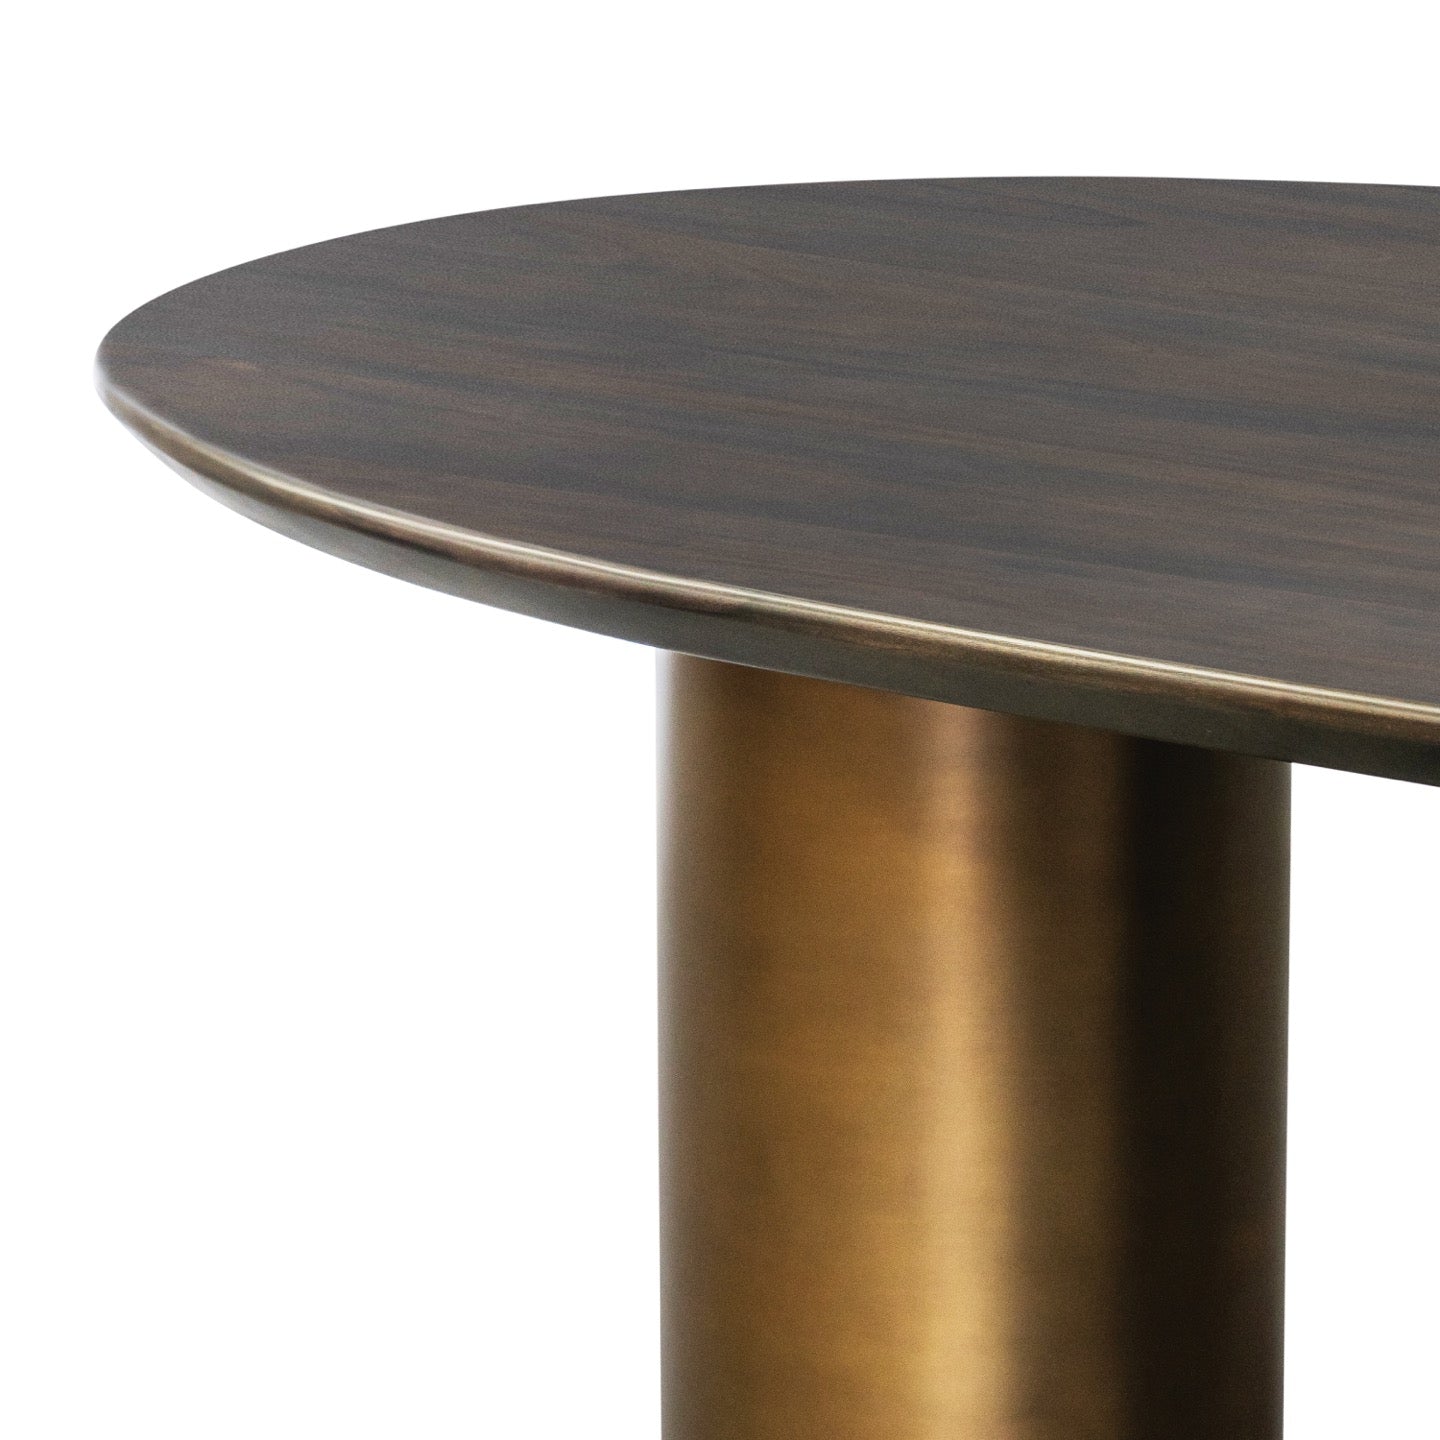 Adela Dining Table - Tobacco